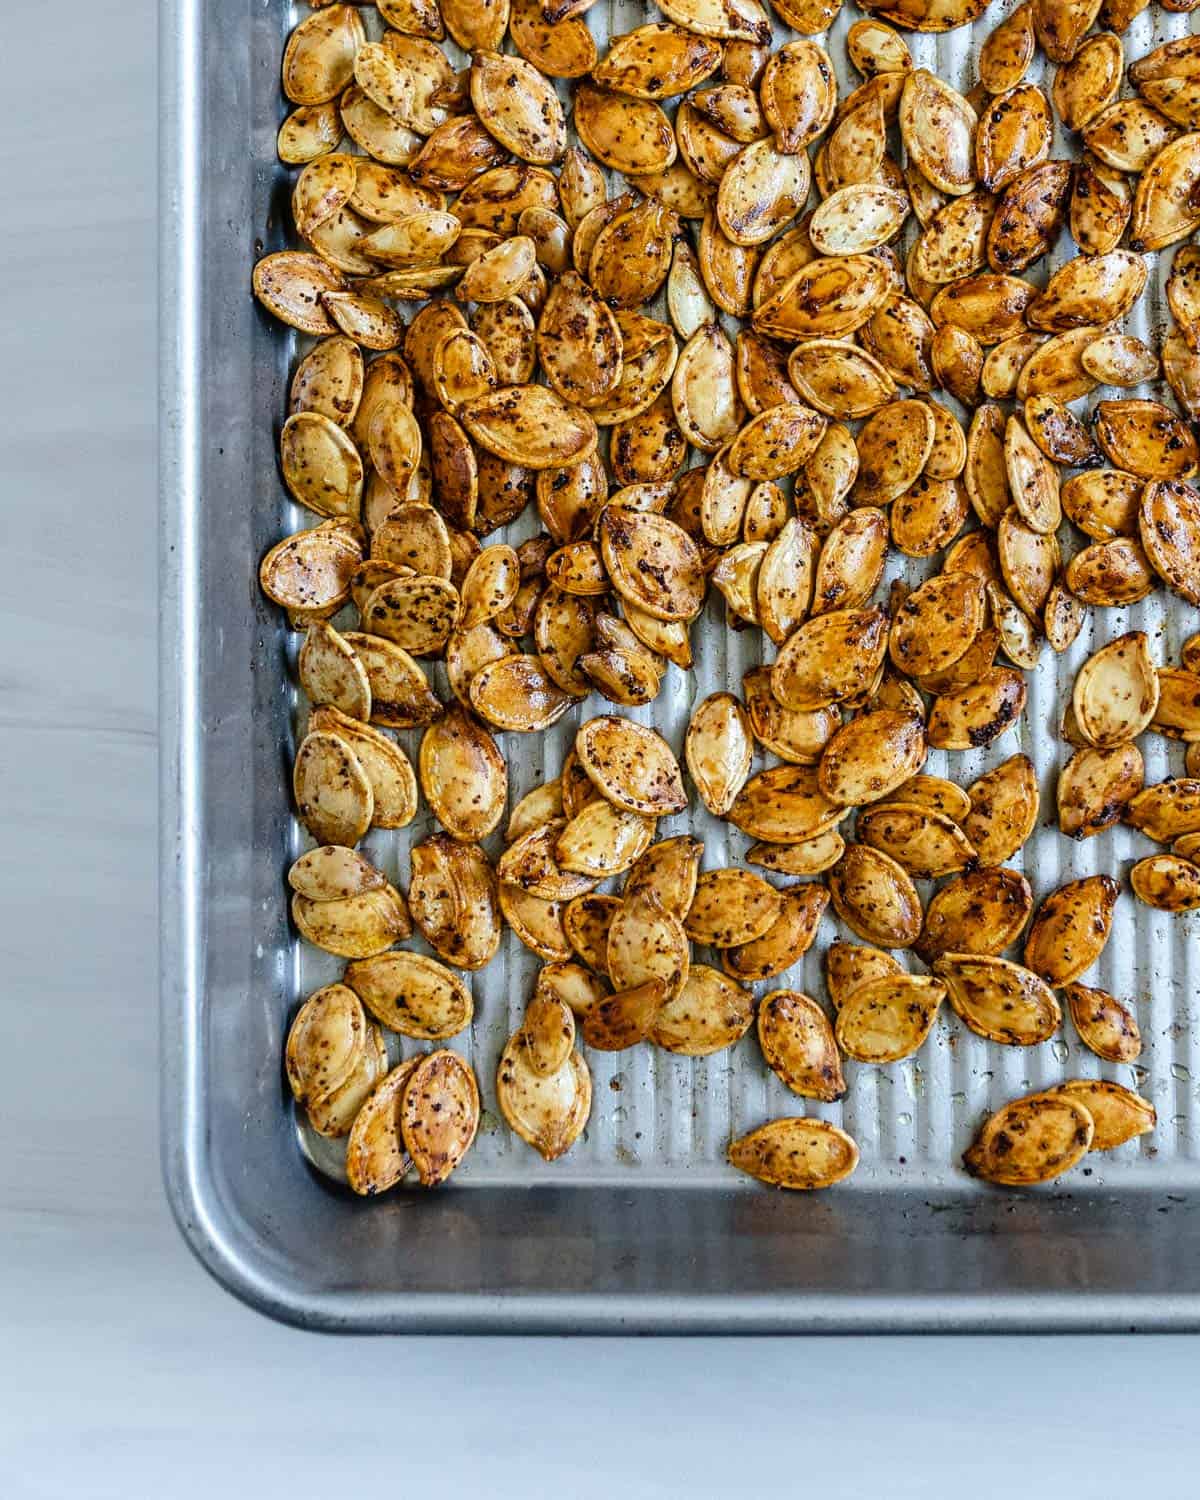 completed roasted ،y pumpkin seeds on a tray